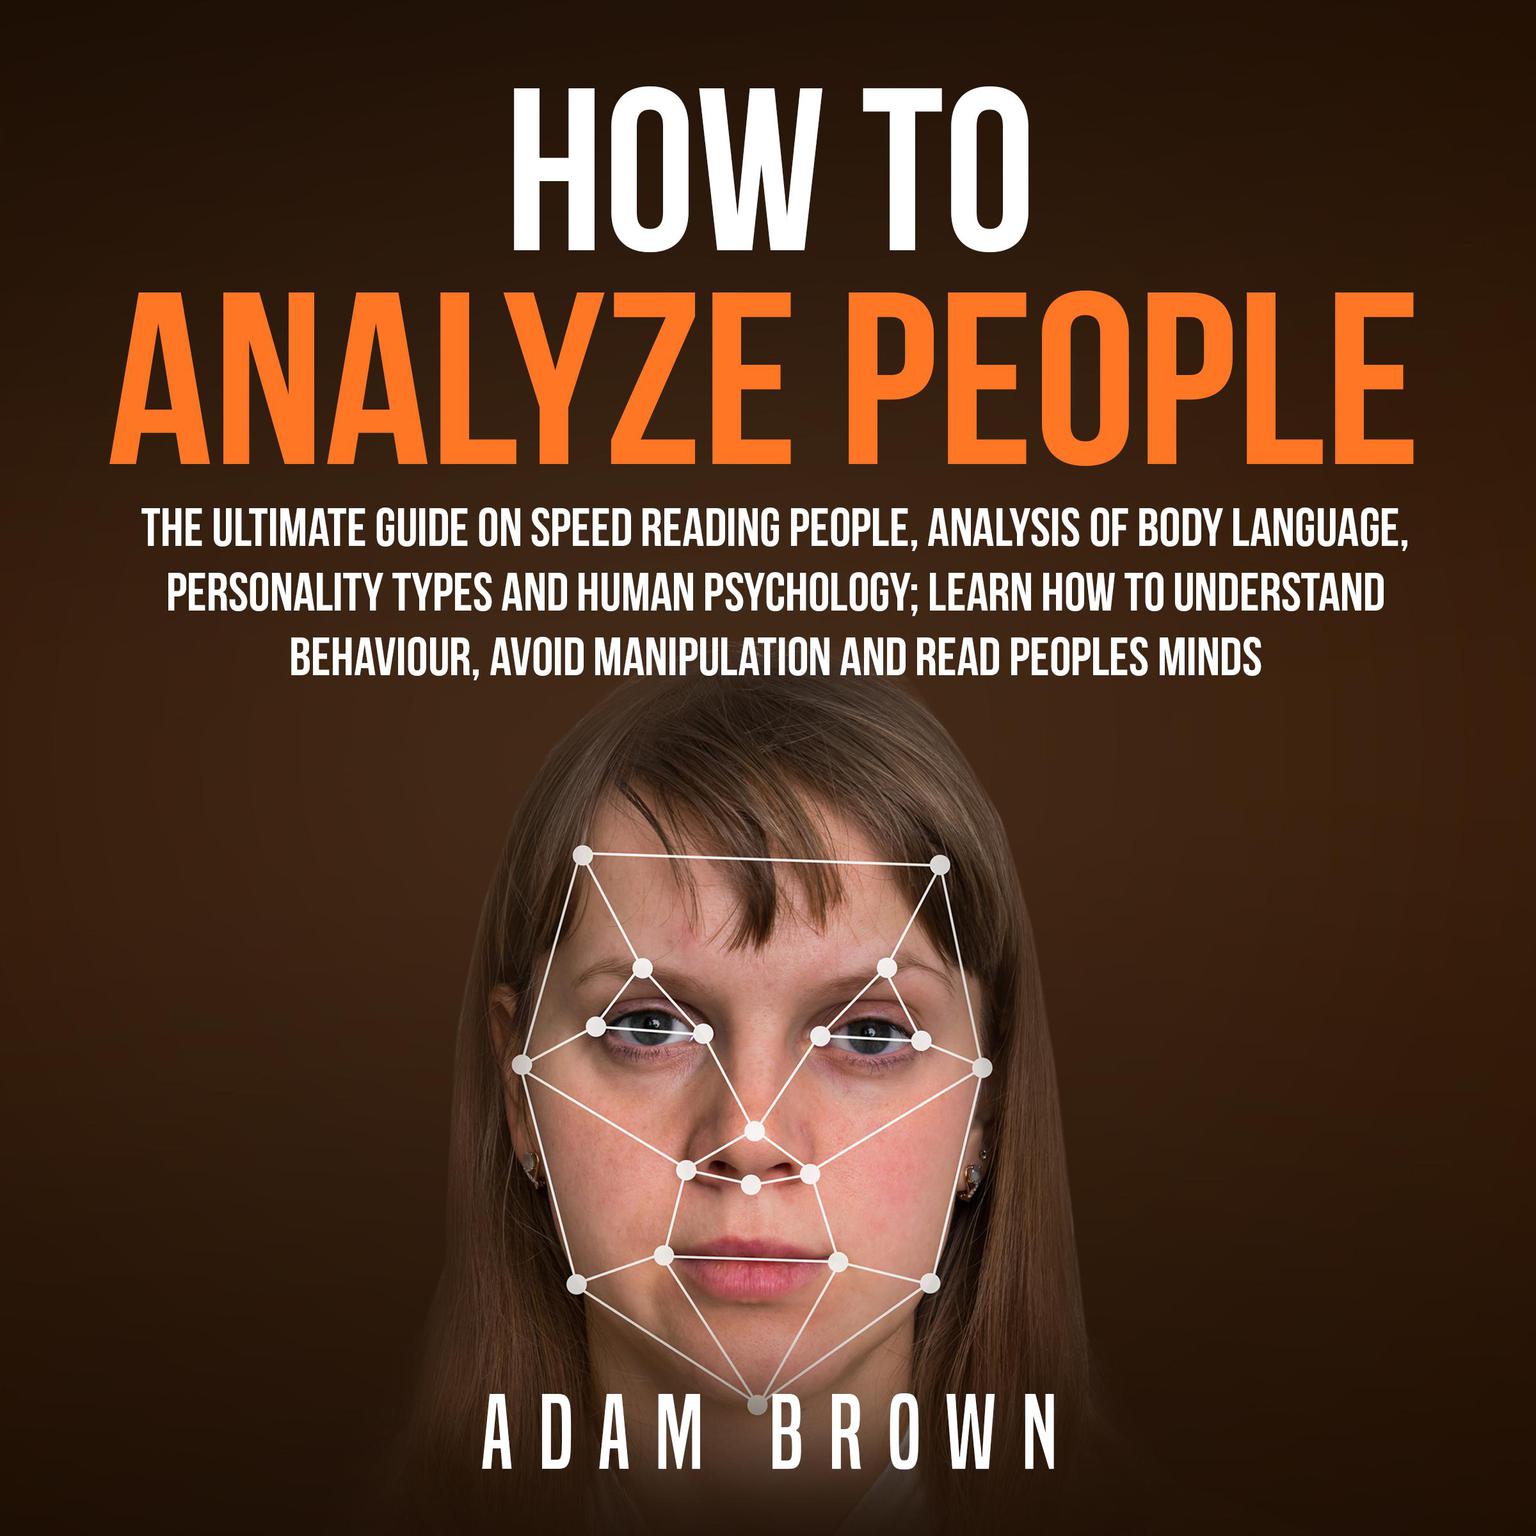 How to Analyze People: The Ultimate Guide On Speed Reading People, Analysis Of Body Language, Personality Types And Human Psychology; Learn How To Understand Behaviour, Avoid Manipulation And Read Peoples Minds: The Ultimate Guide On Speed Reading People, Analysis Of Body Language, Personality Types And Human Psychology; Learn How To Understand Behaviour And Read Peoples Minds Audiobook, by Adam Brown